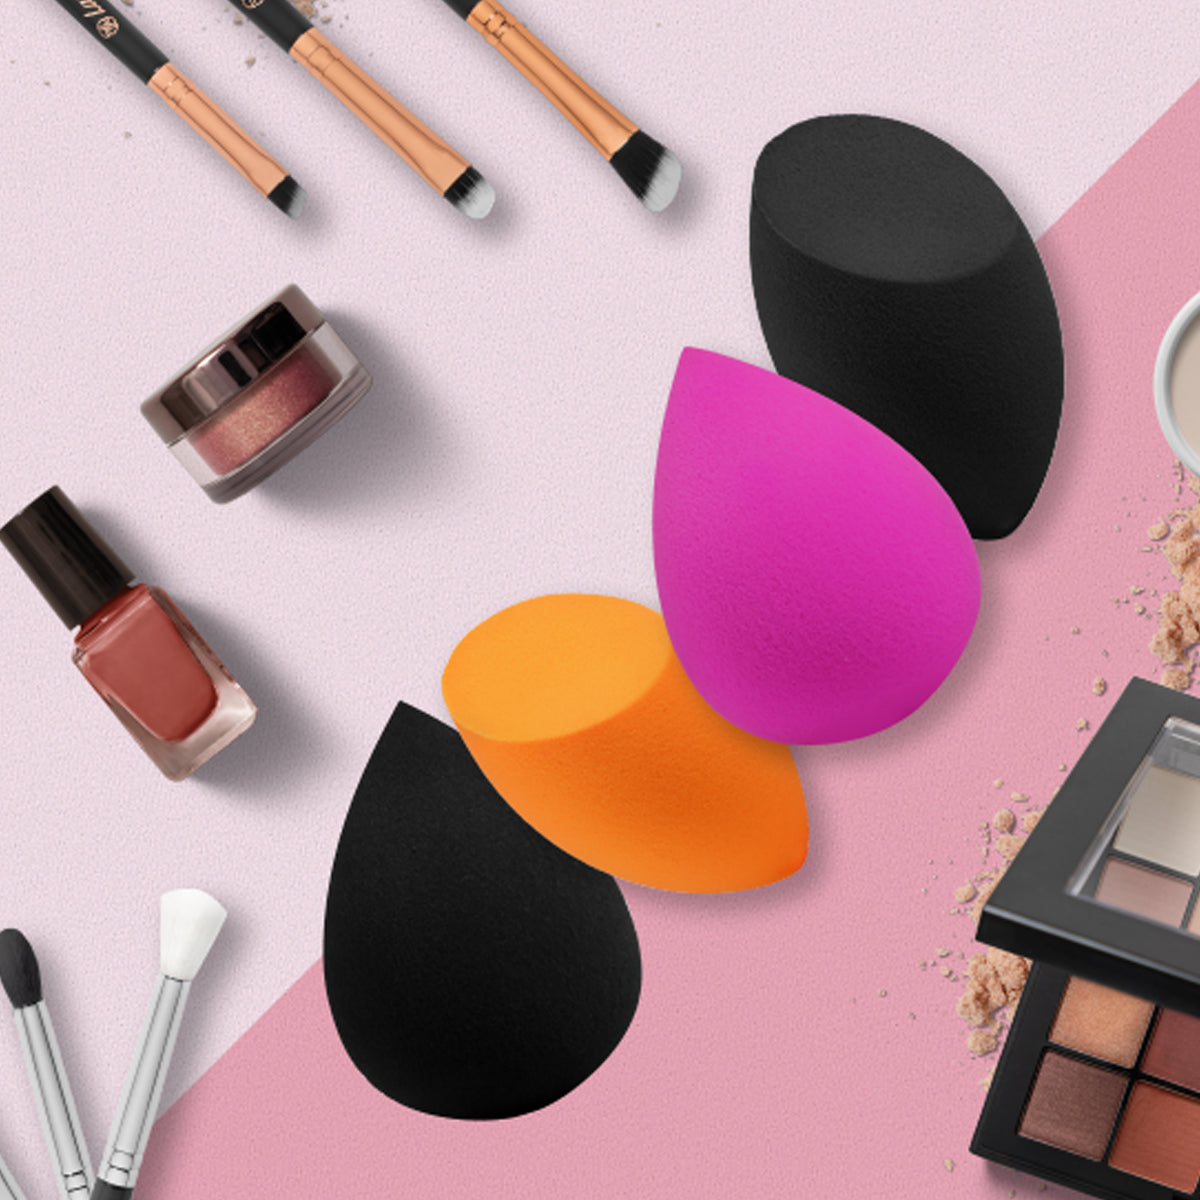 Beauty background image with beauty blenders and cosmetic sets